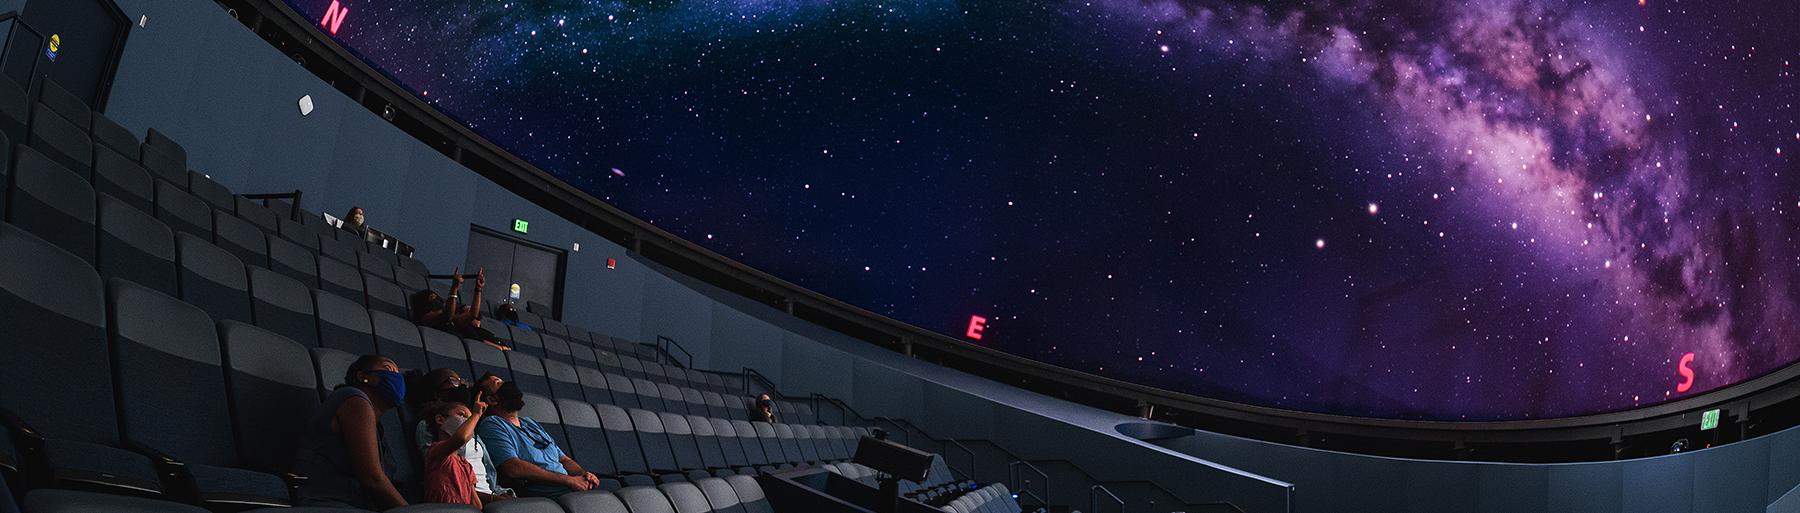 State Museum Planetarium with guests seated and one young girl pointing up at the milky way projected on the dome